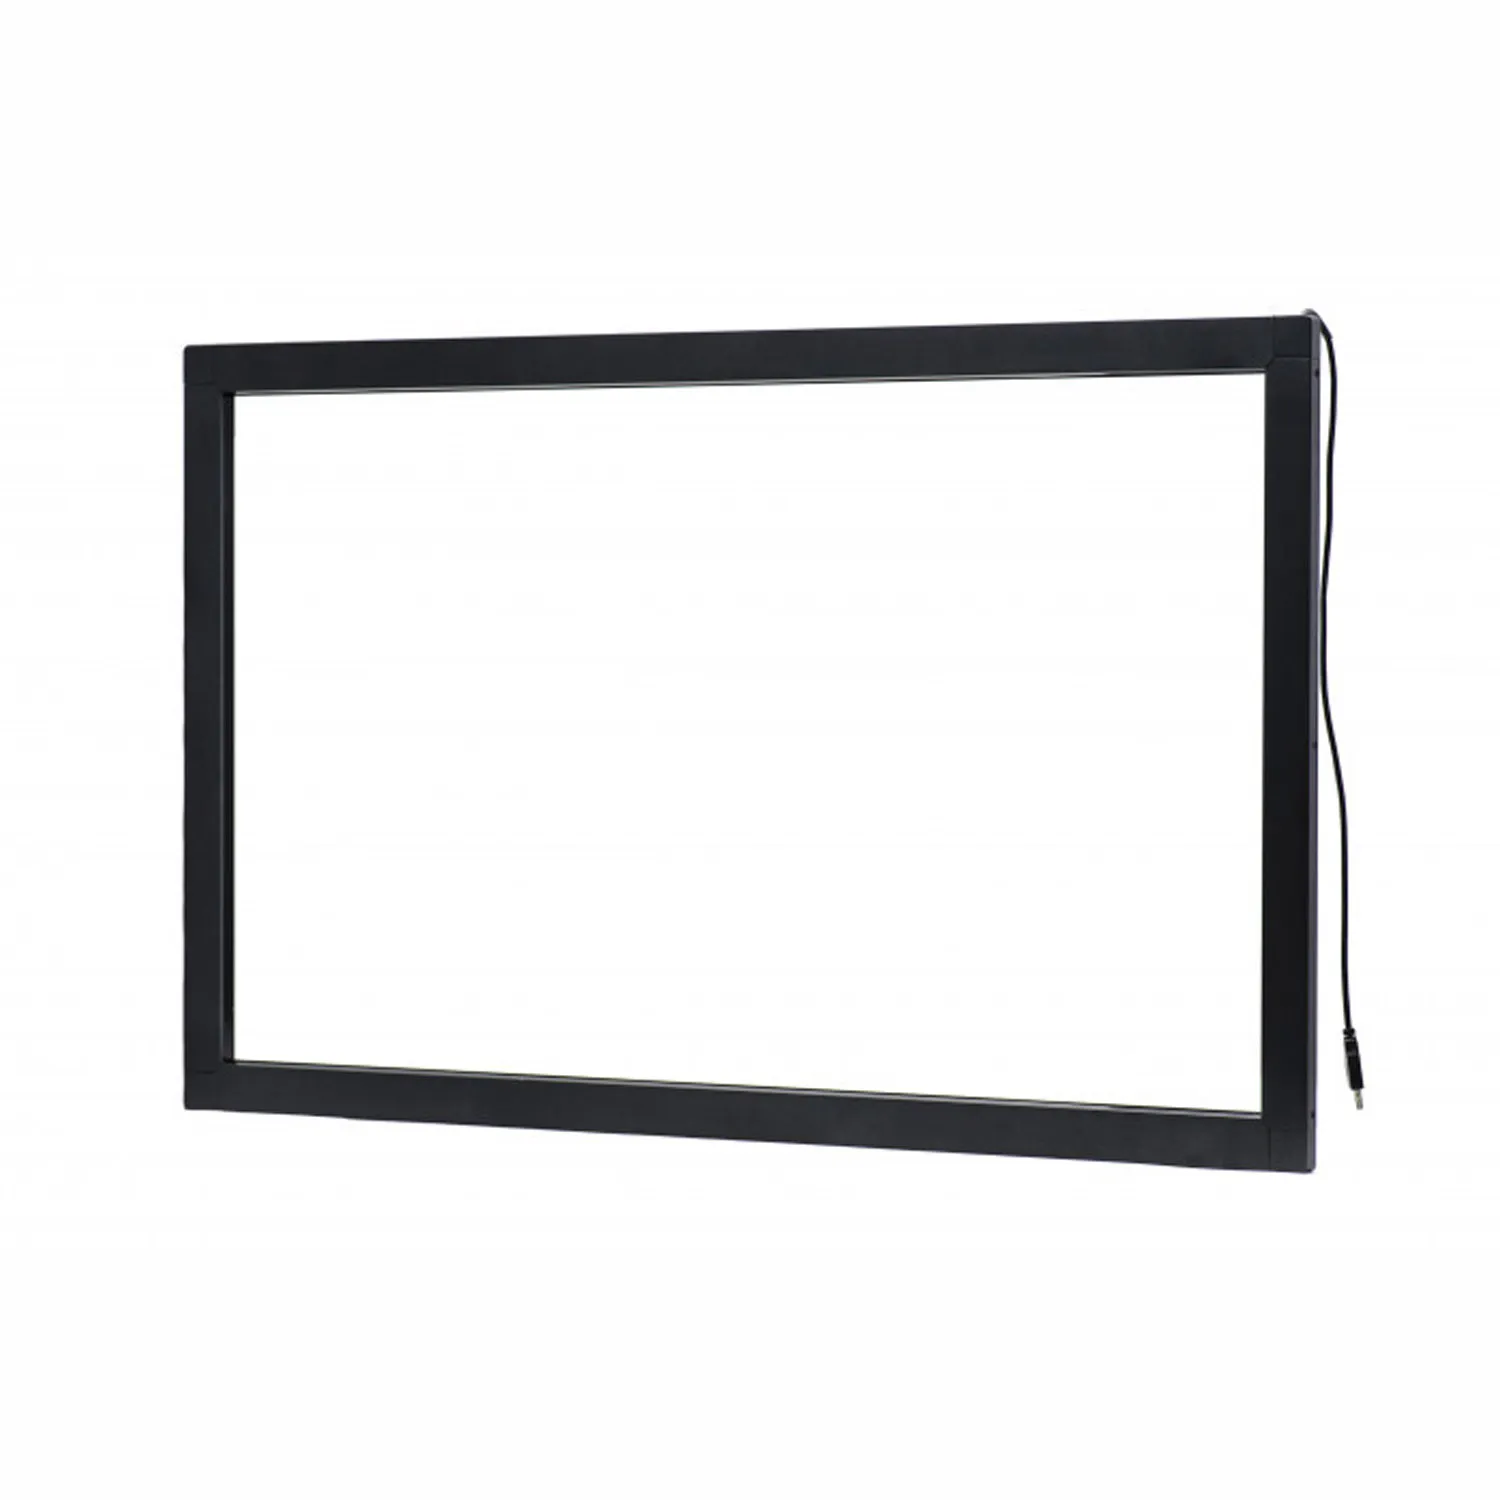 Touch frame Keetouch GmbH 42" KP-420-IW2S0U1